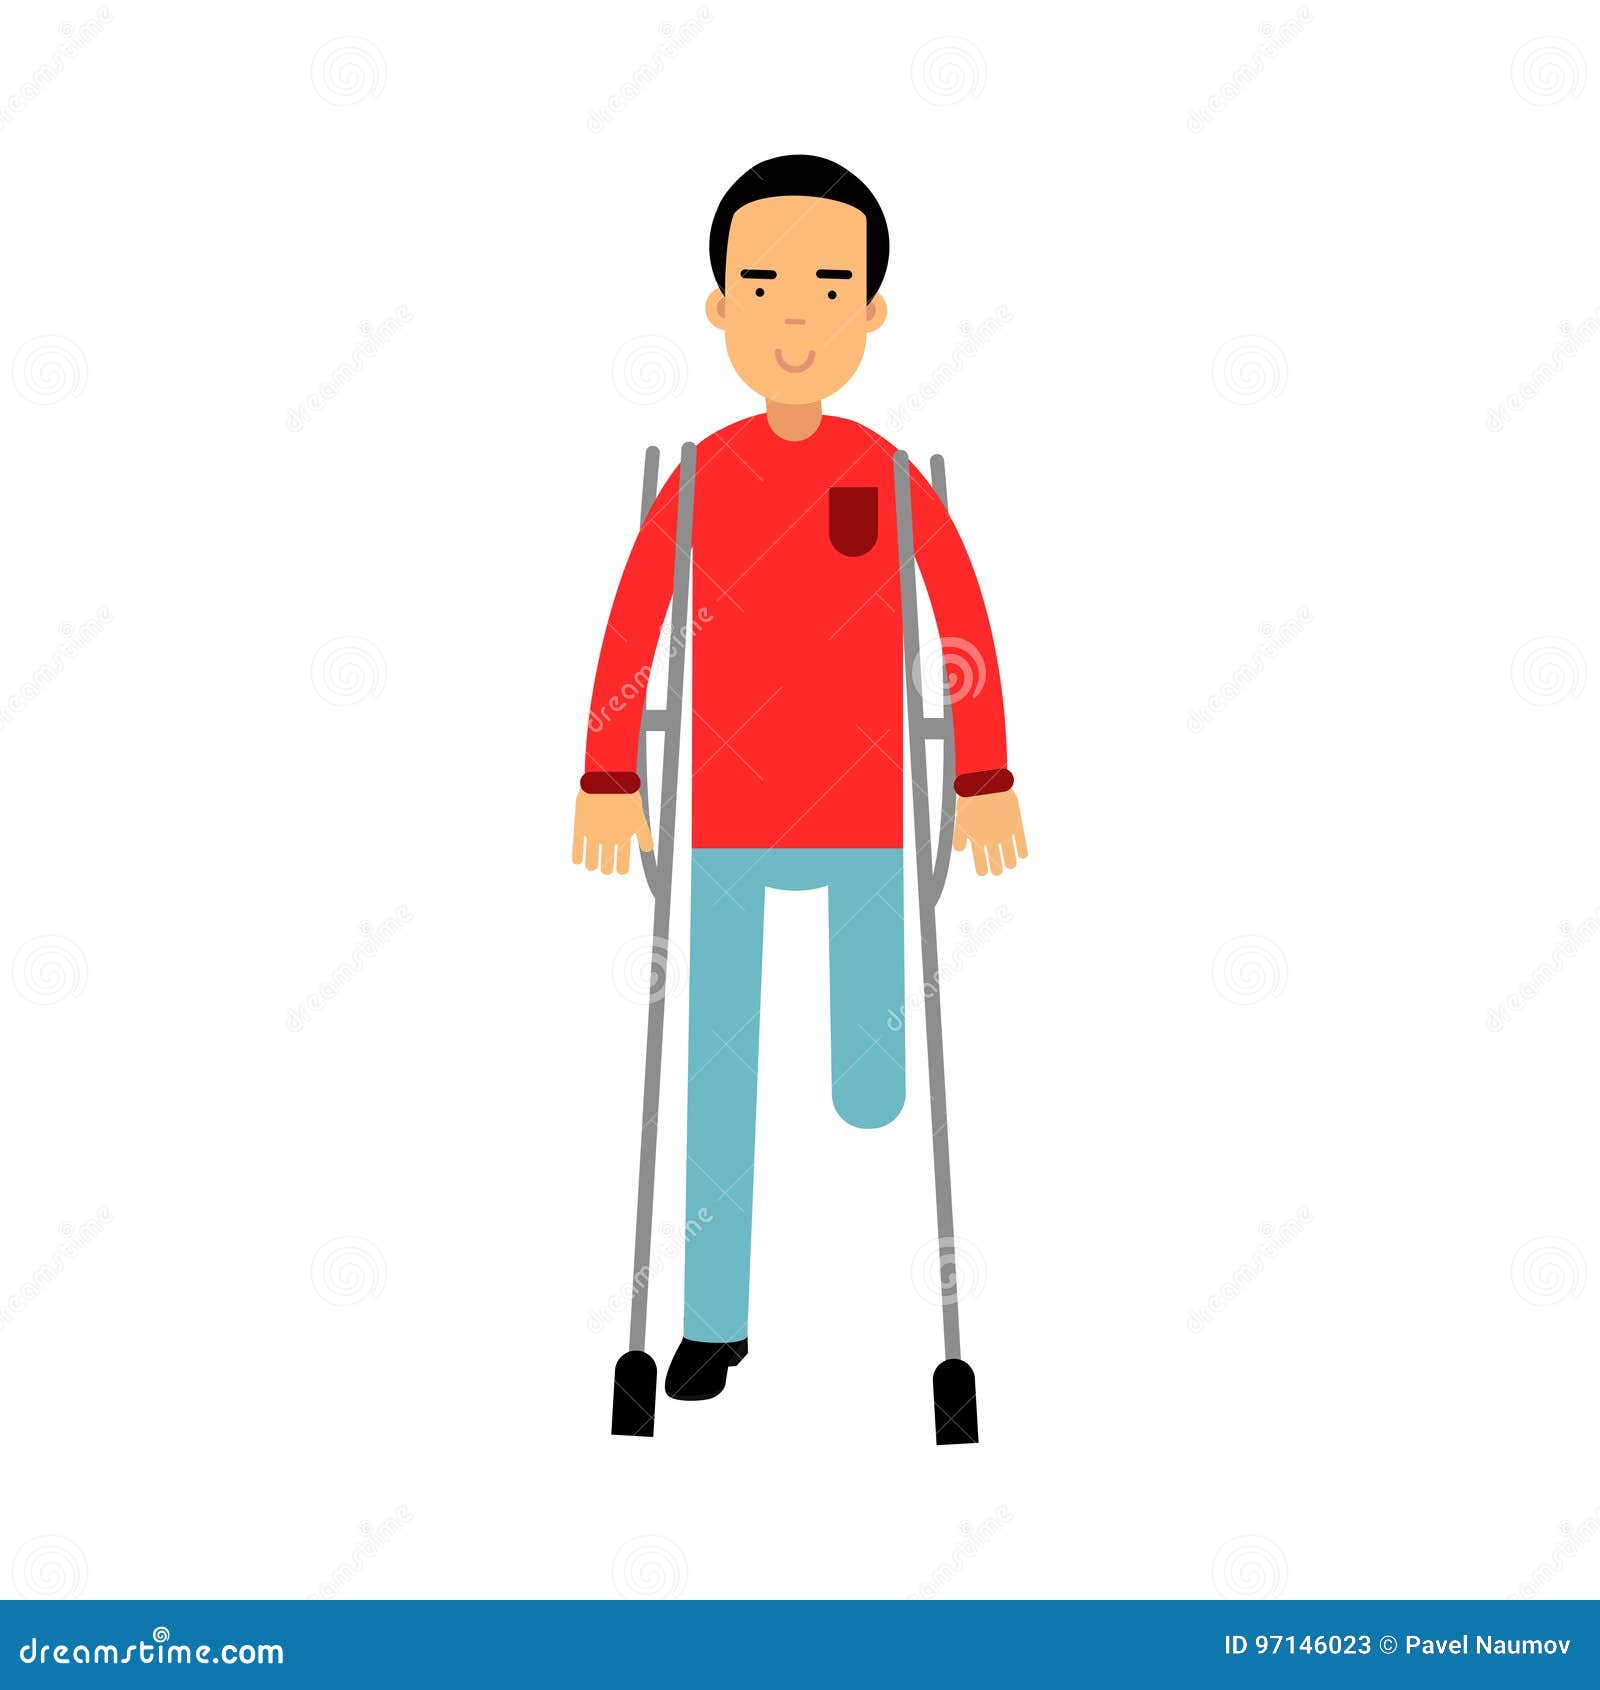 one-legged-disabled-man-crutches-colorful-illustration-white-background-one-legged-disabled-man-crutches-colorful-97146023.jpg